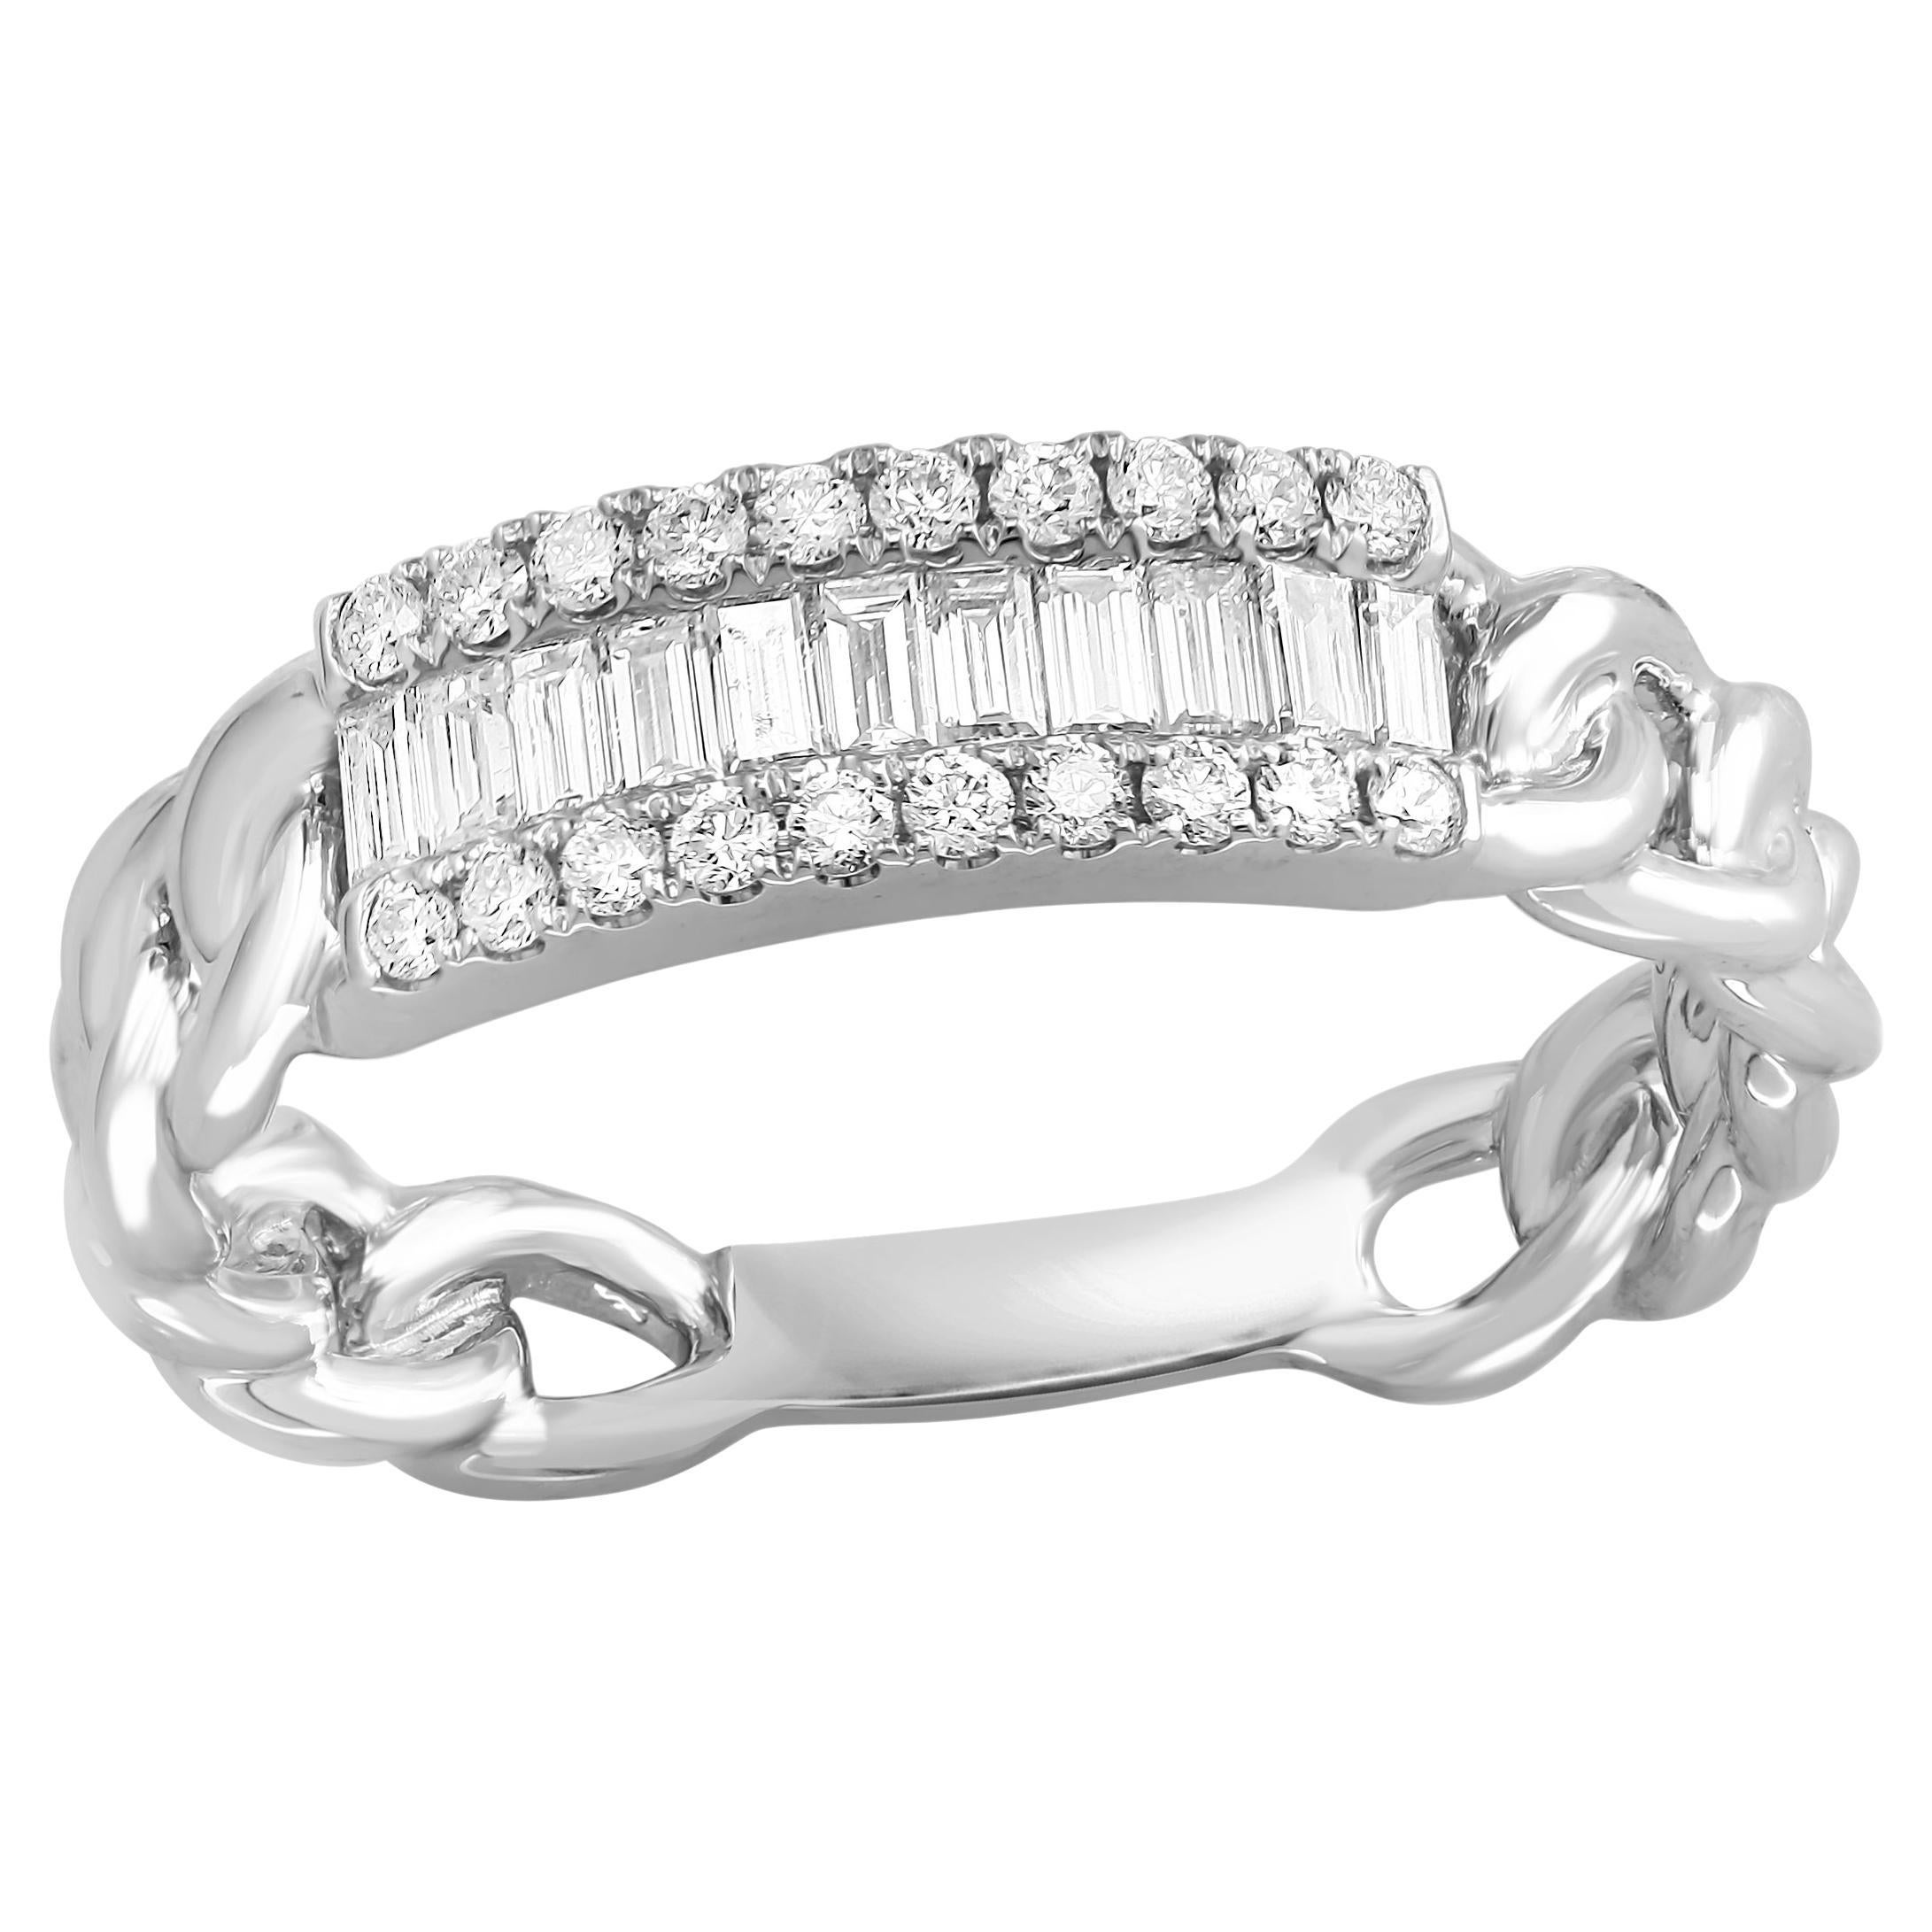 0.41 Carat Baguette Diamond Fashion Ring in 18K White Gold For Sale